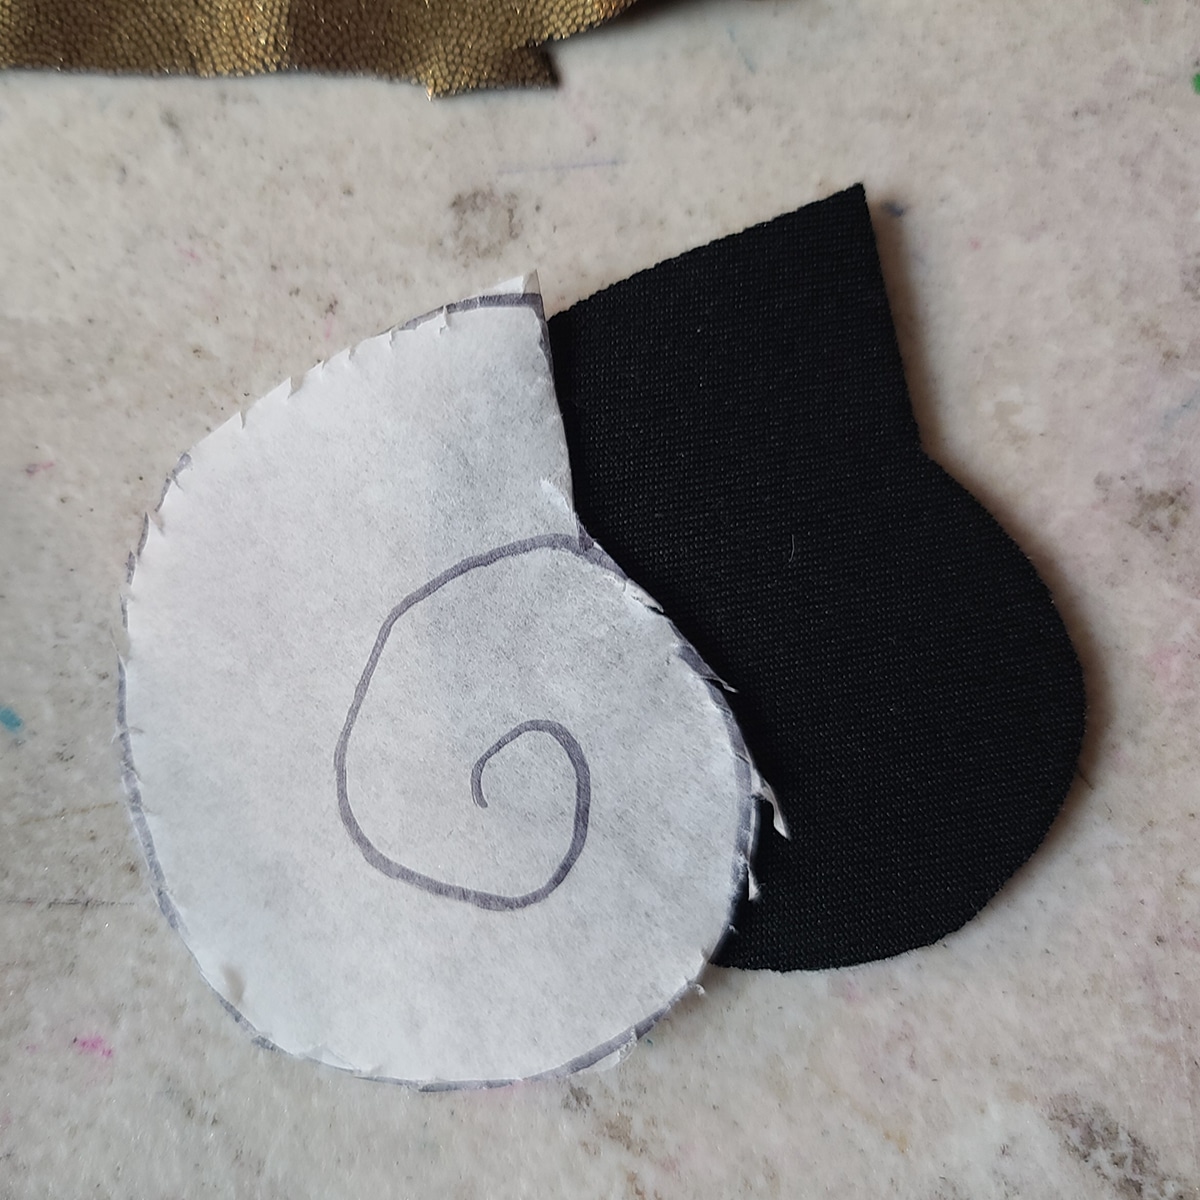 The shell pattern and a piece of bra padding have both been cut to shape and size.